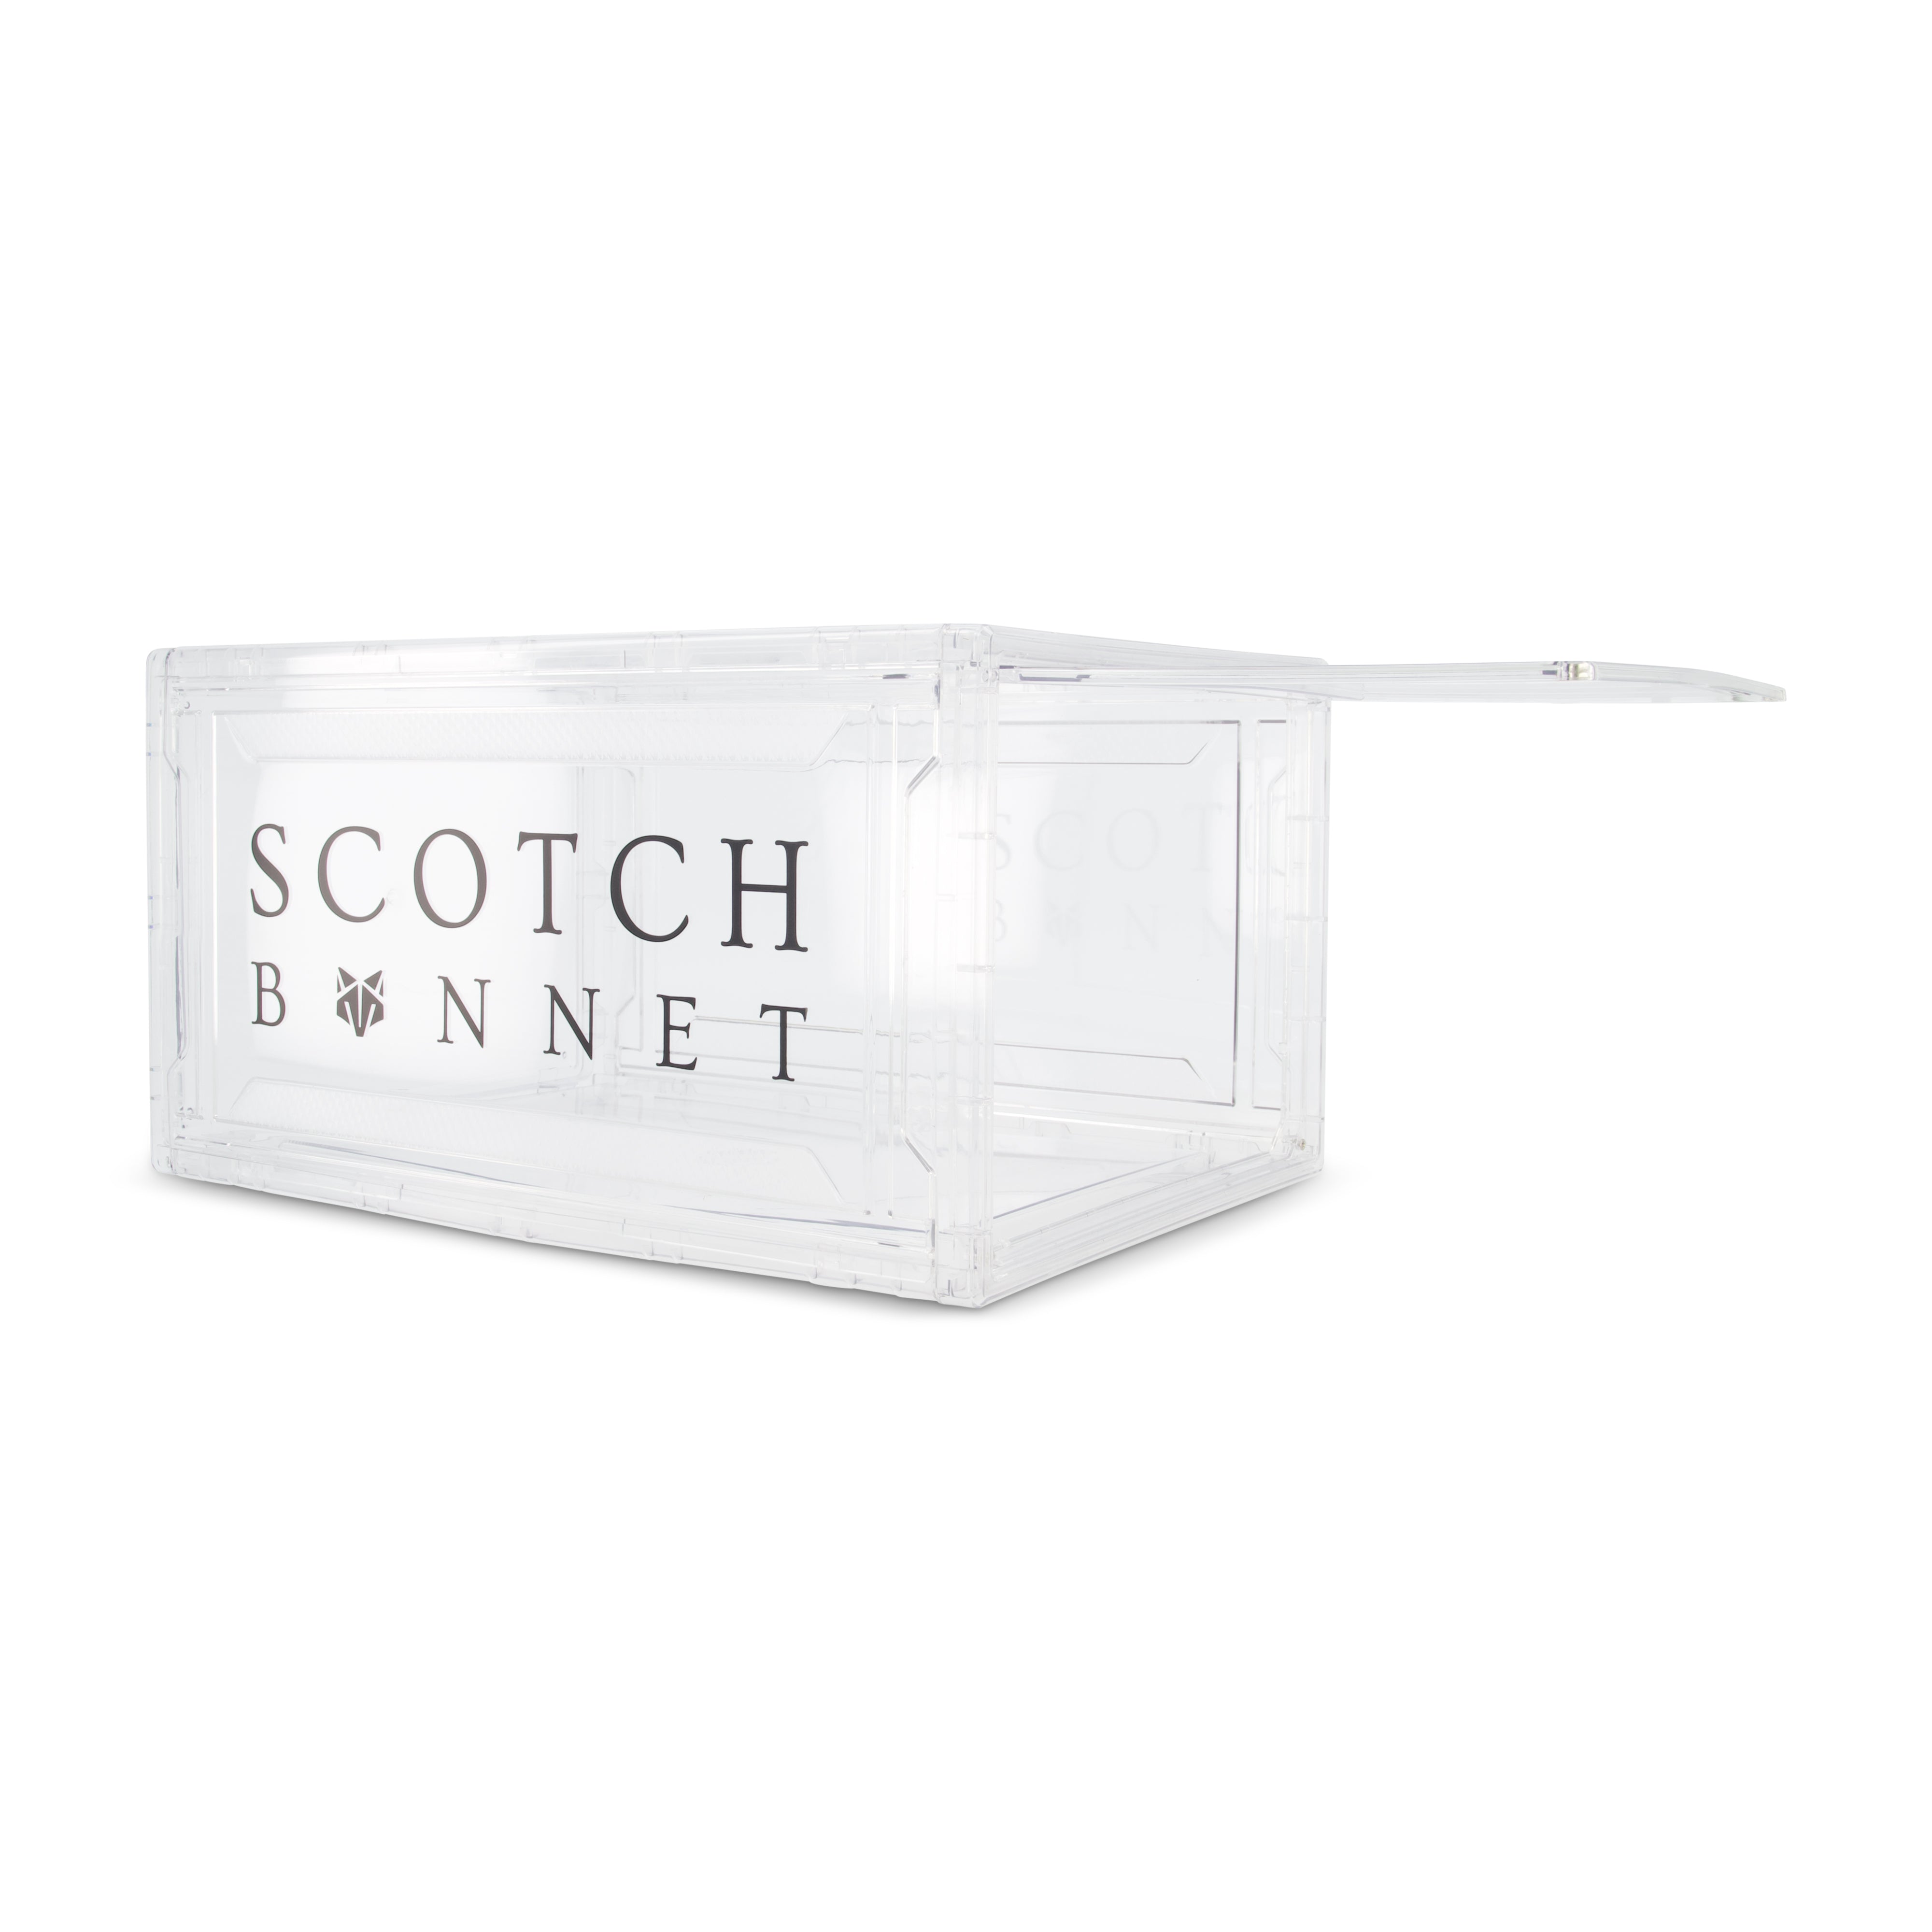 The Scotch Bonnet box   (Any order over 300$ will include a free Scotch Bonnet box)